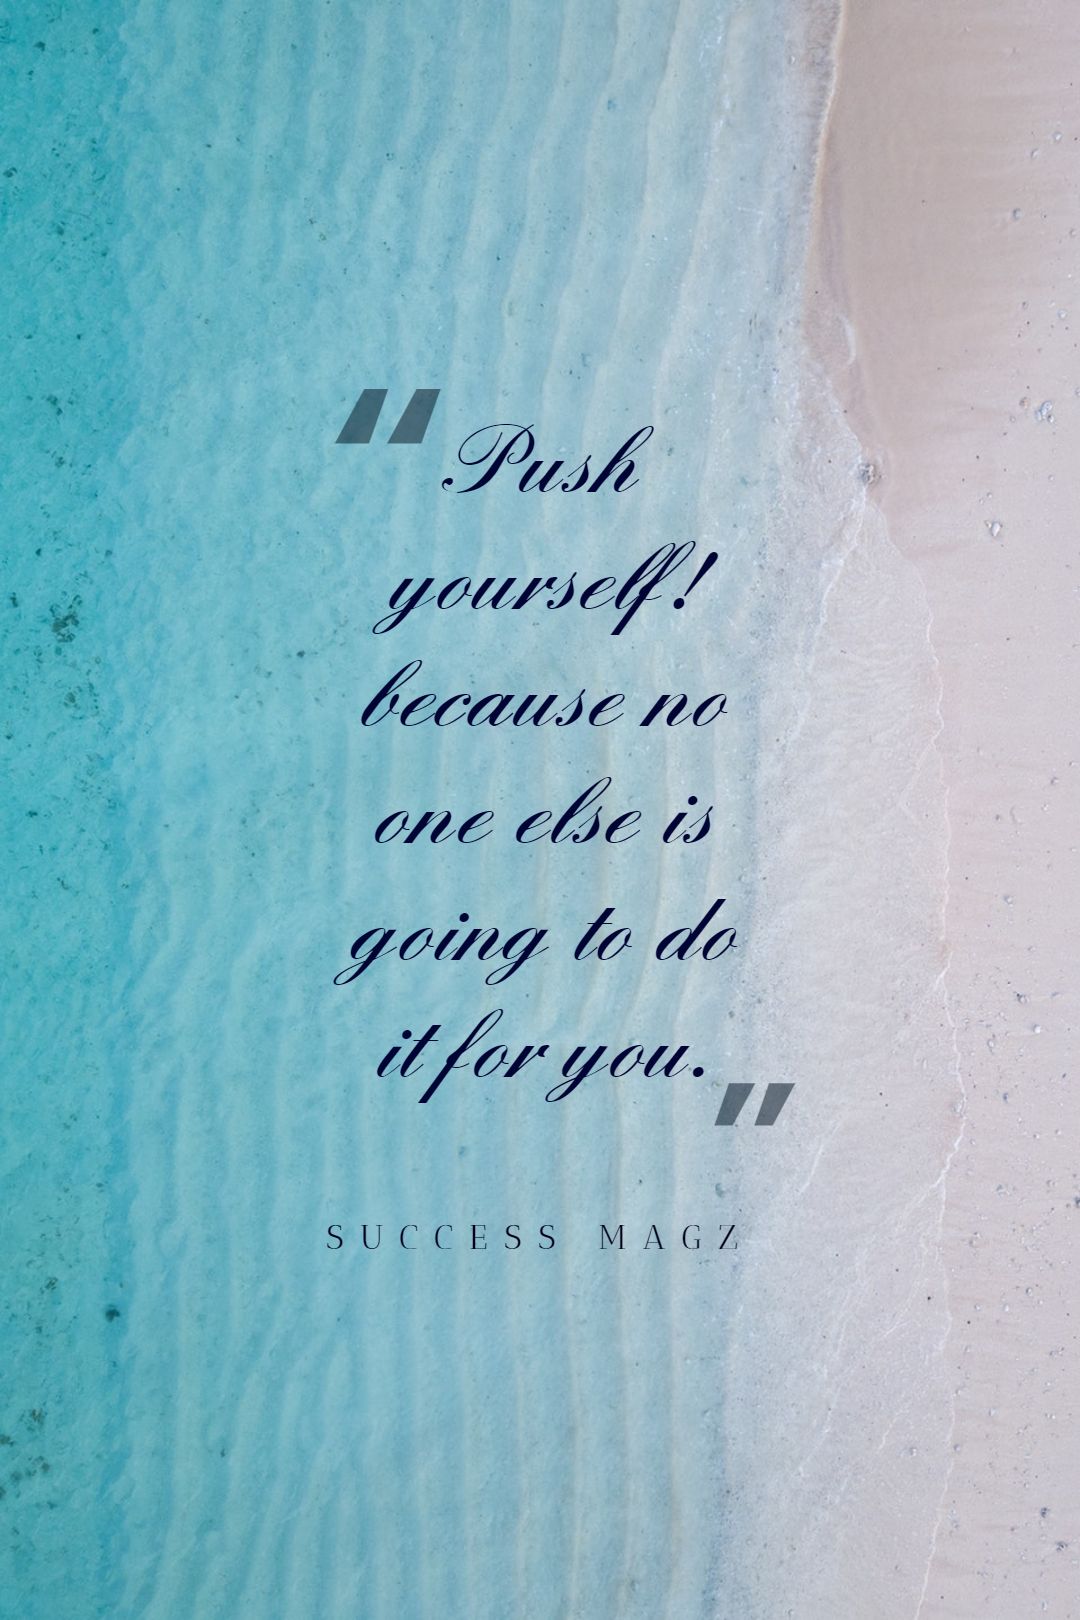 success magz ‘s quote about Spirit. Push yourself! because no one…